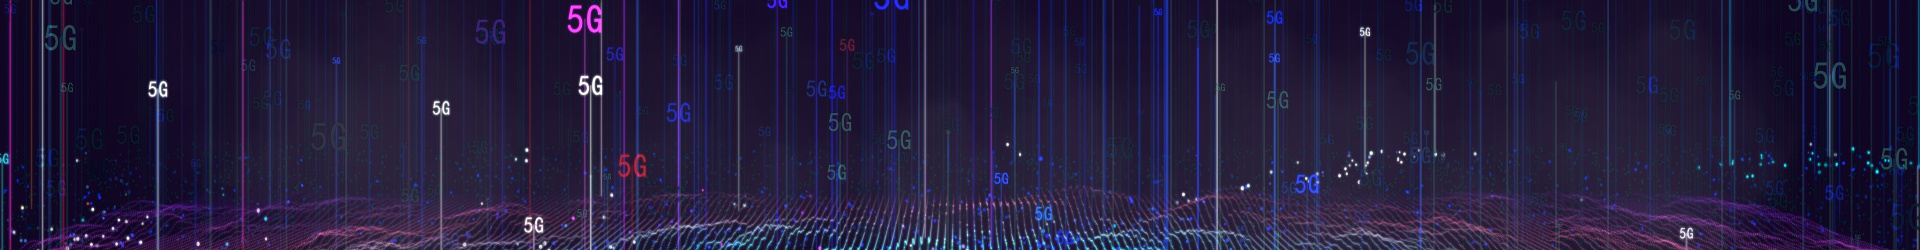 Enterprises in China Need to Prepare for 5G